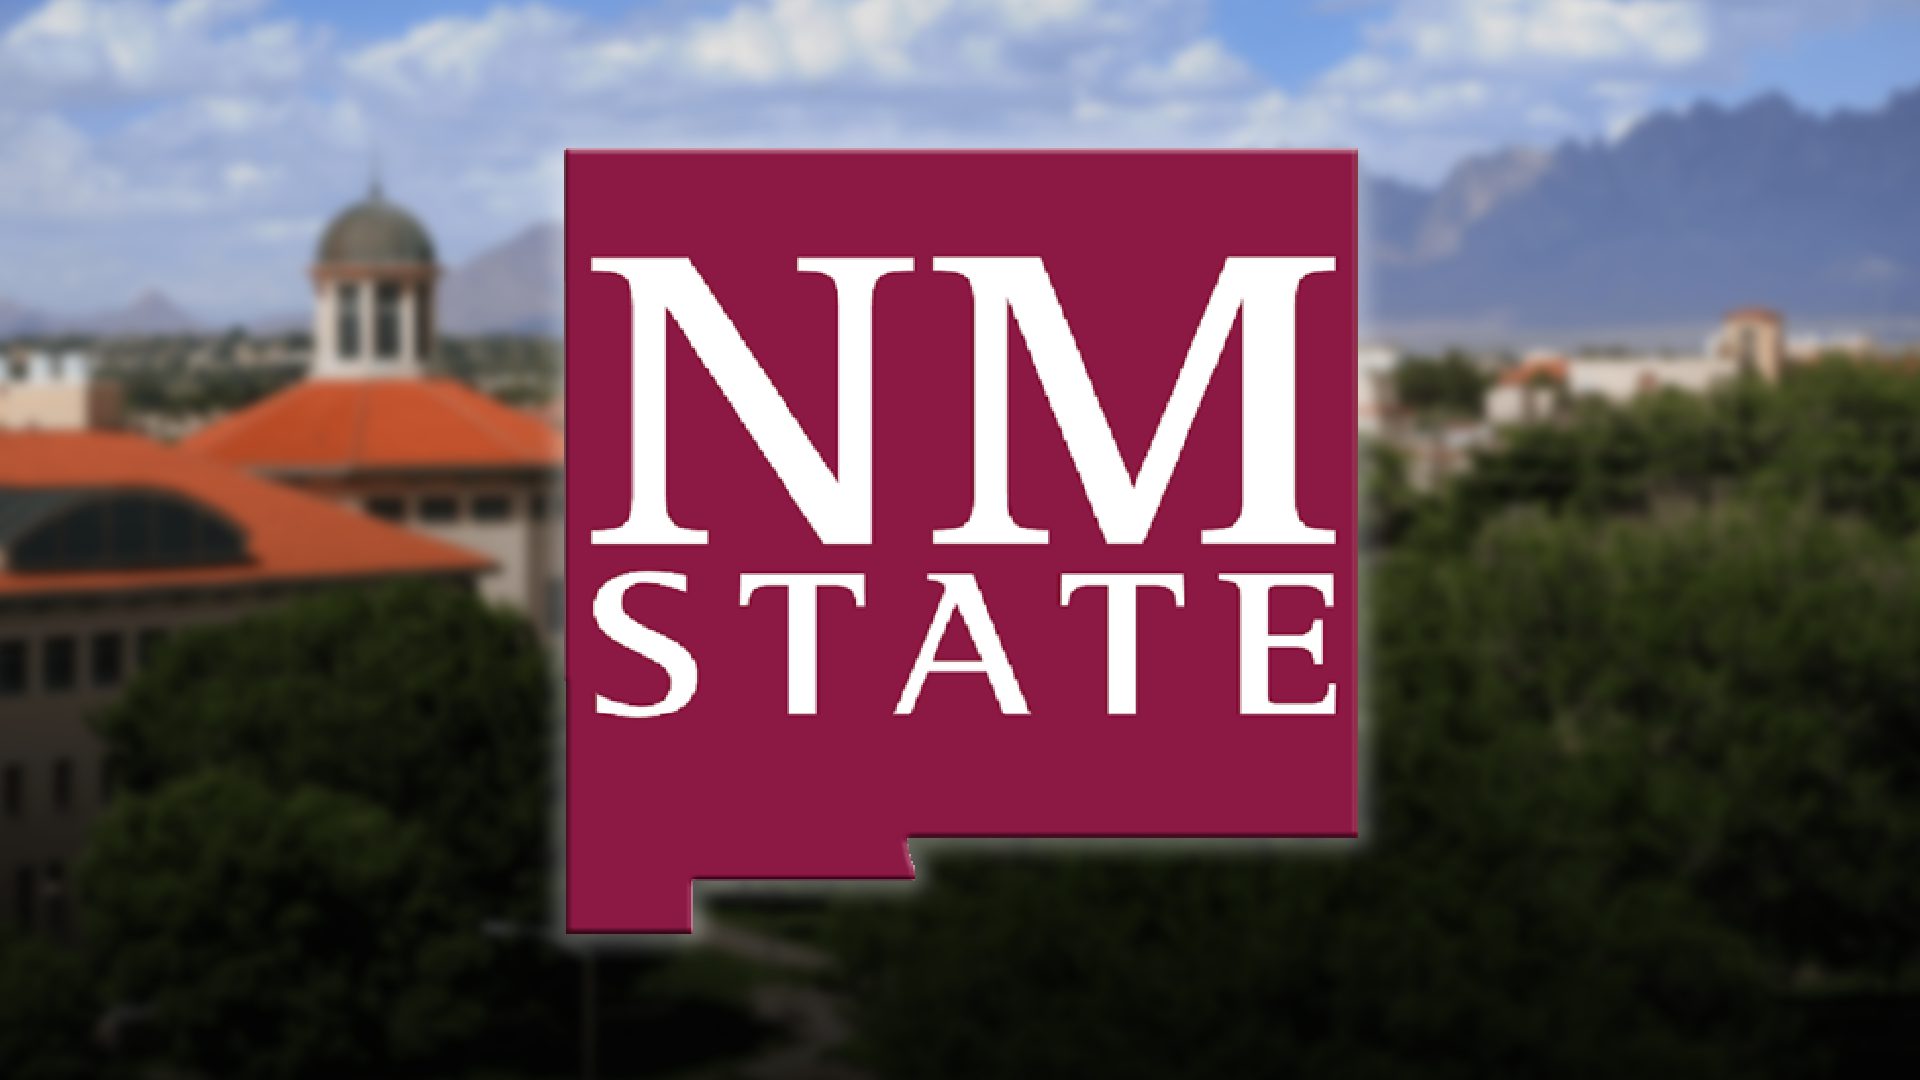 US$2.5 million for STEM scholarships are awarded at NMSU